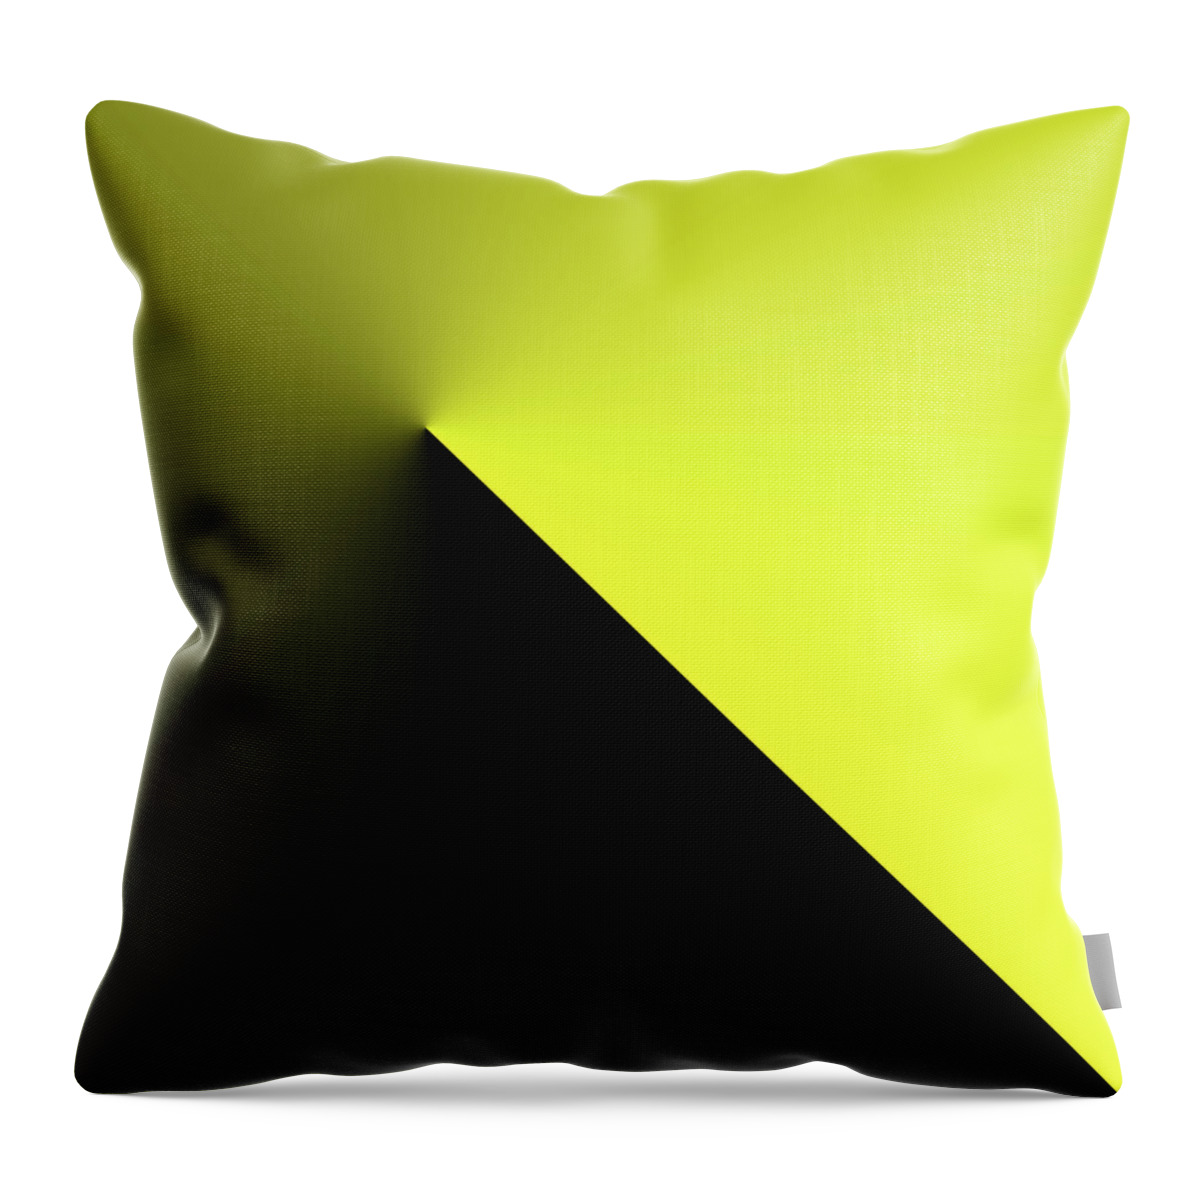 Yellow Throw Pillow featuring the digital art Shades of Yellow In Rotational Gradient by Bill Swartwout